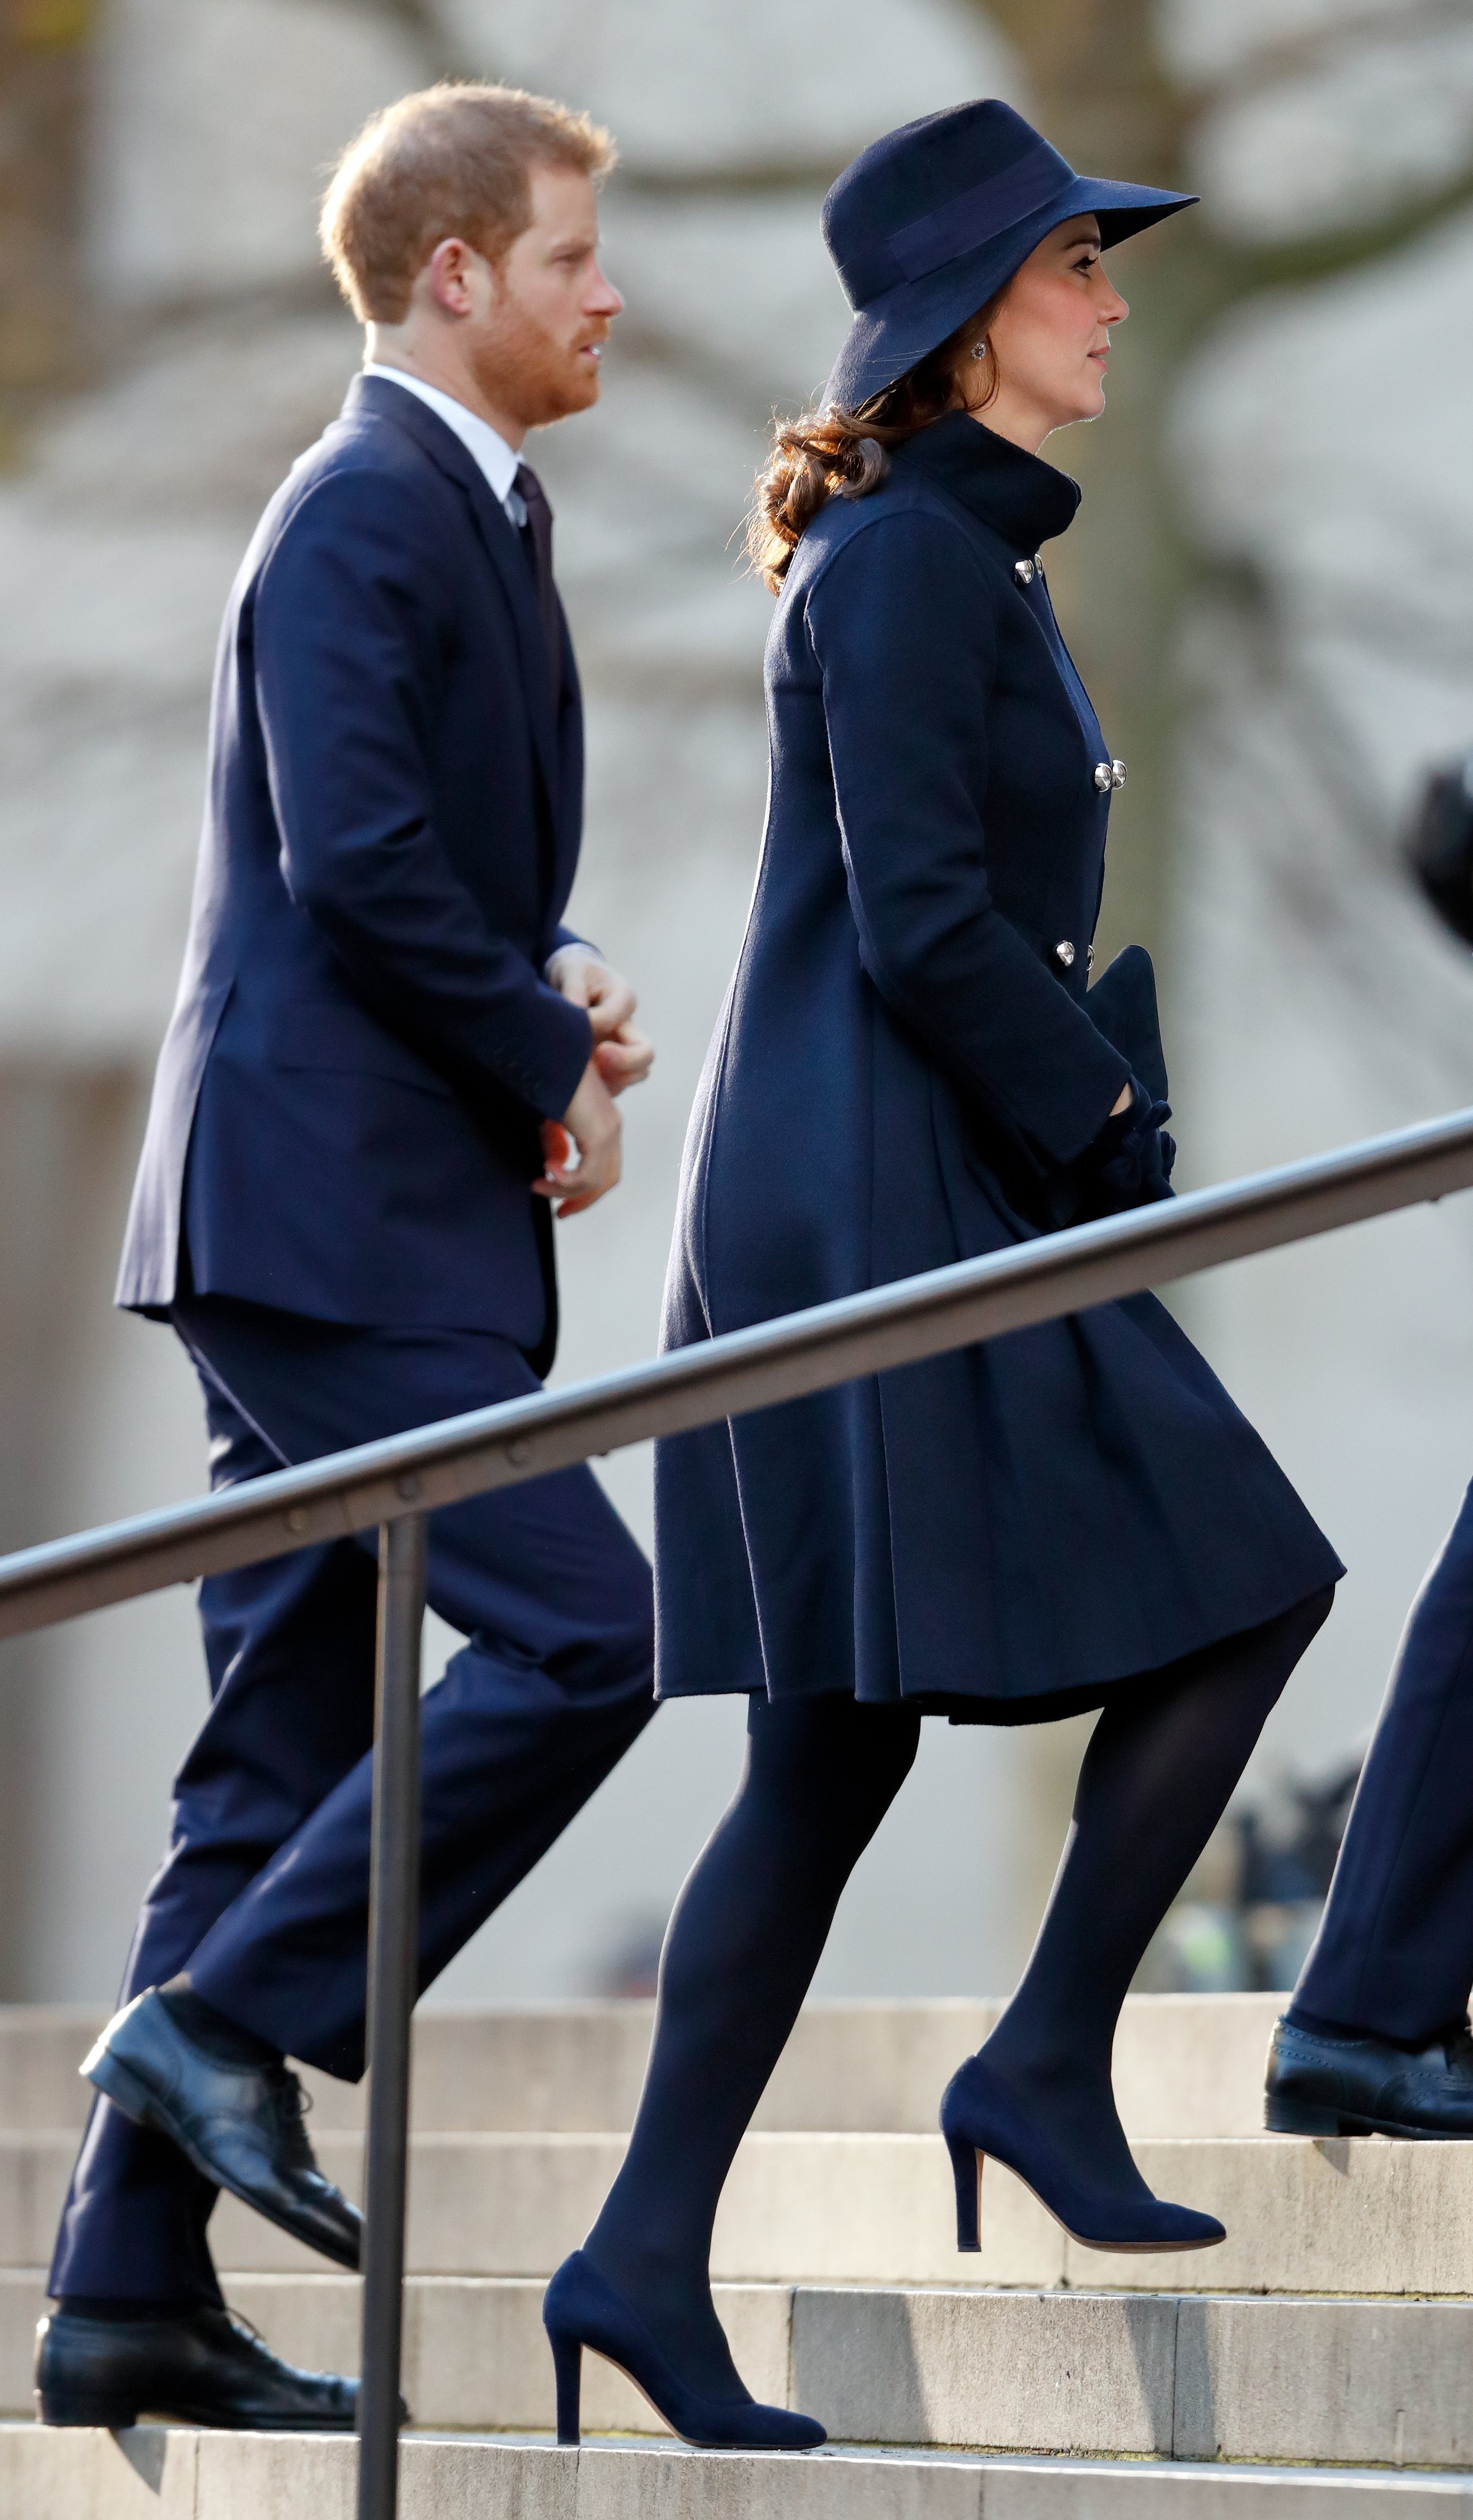 Prince Harry and Kate Middleton attending the Grenfell Tower national memorial service at St Paul's Cathedral on December 14, 2017 in London, England. | Source: Getty Images